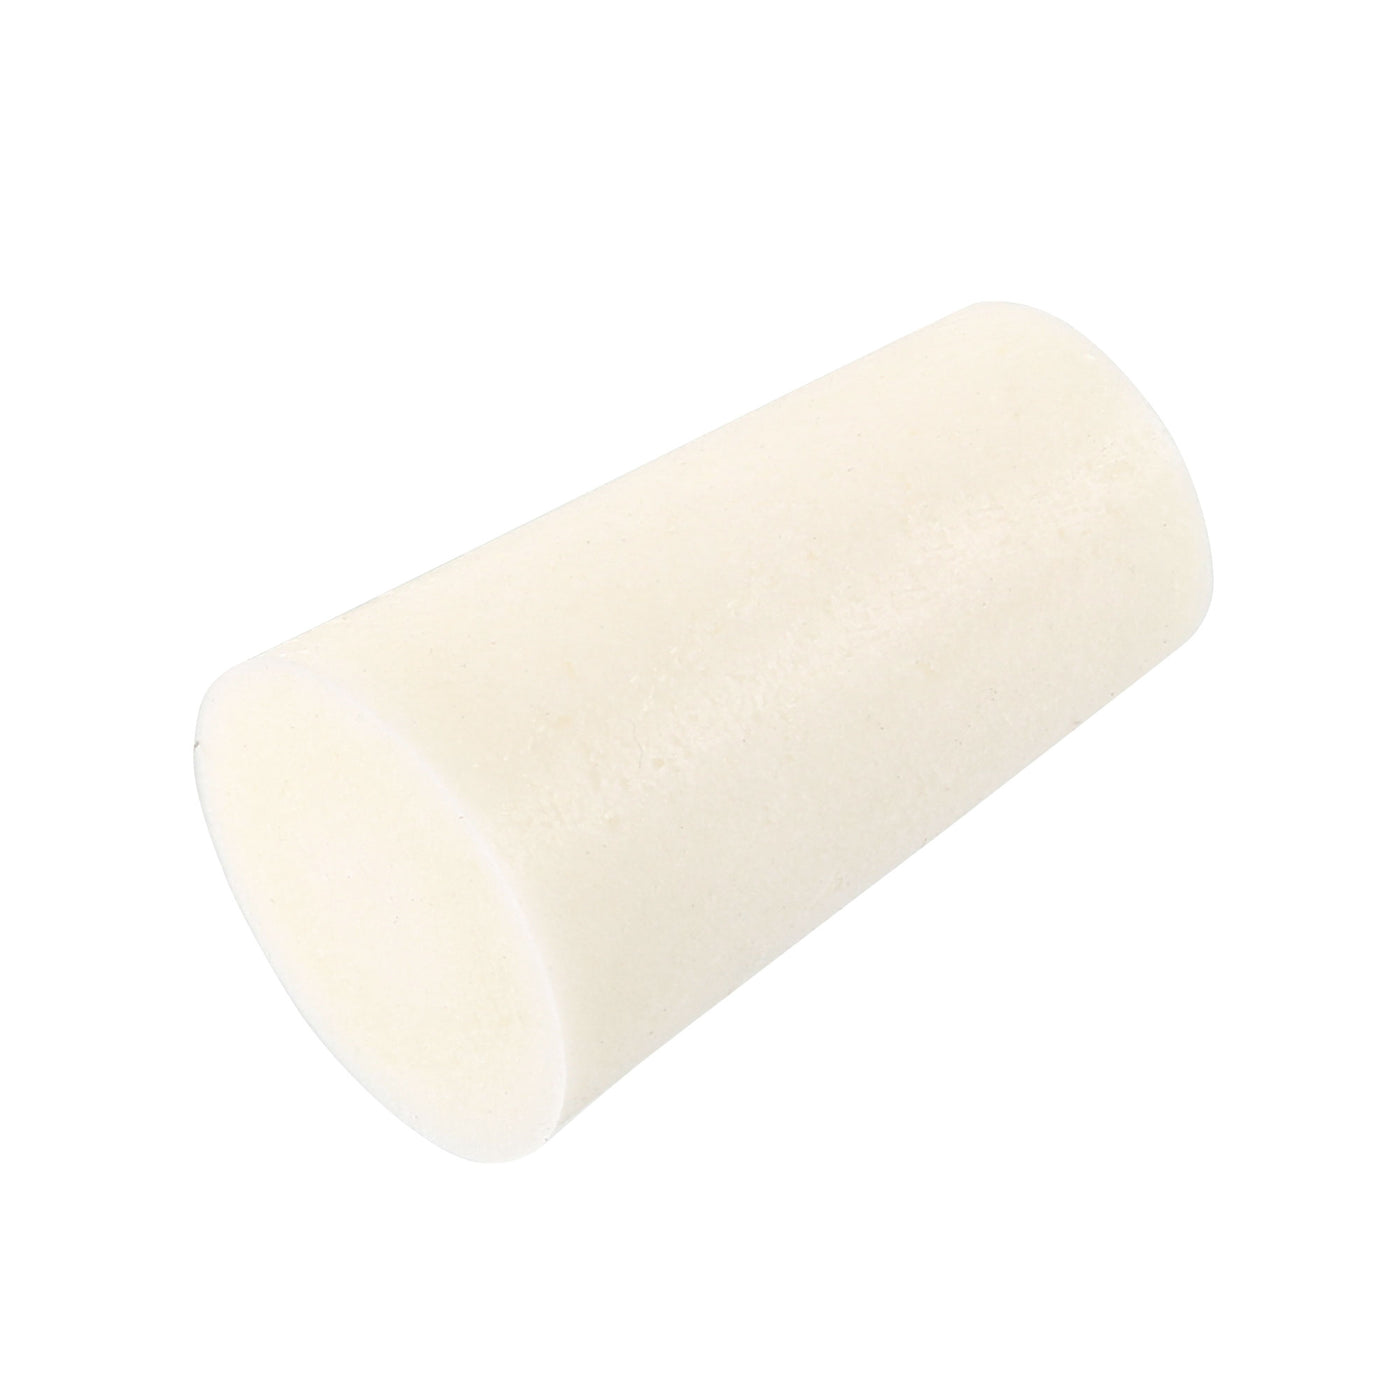 Uxcell Uxcell 15-19mm Beige Drilled Silicone Stopper Plugs for Flask Test Tube Stopper 5pcs